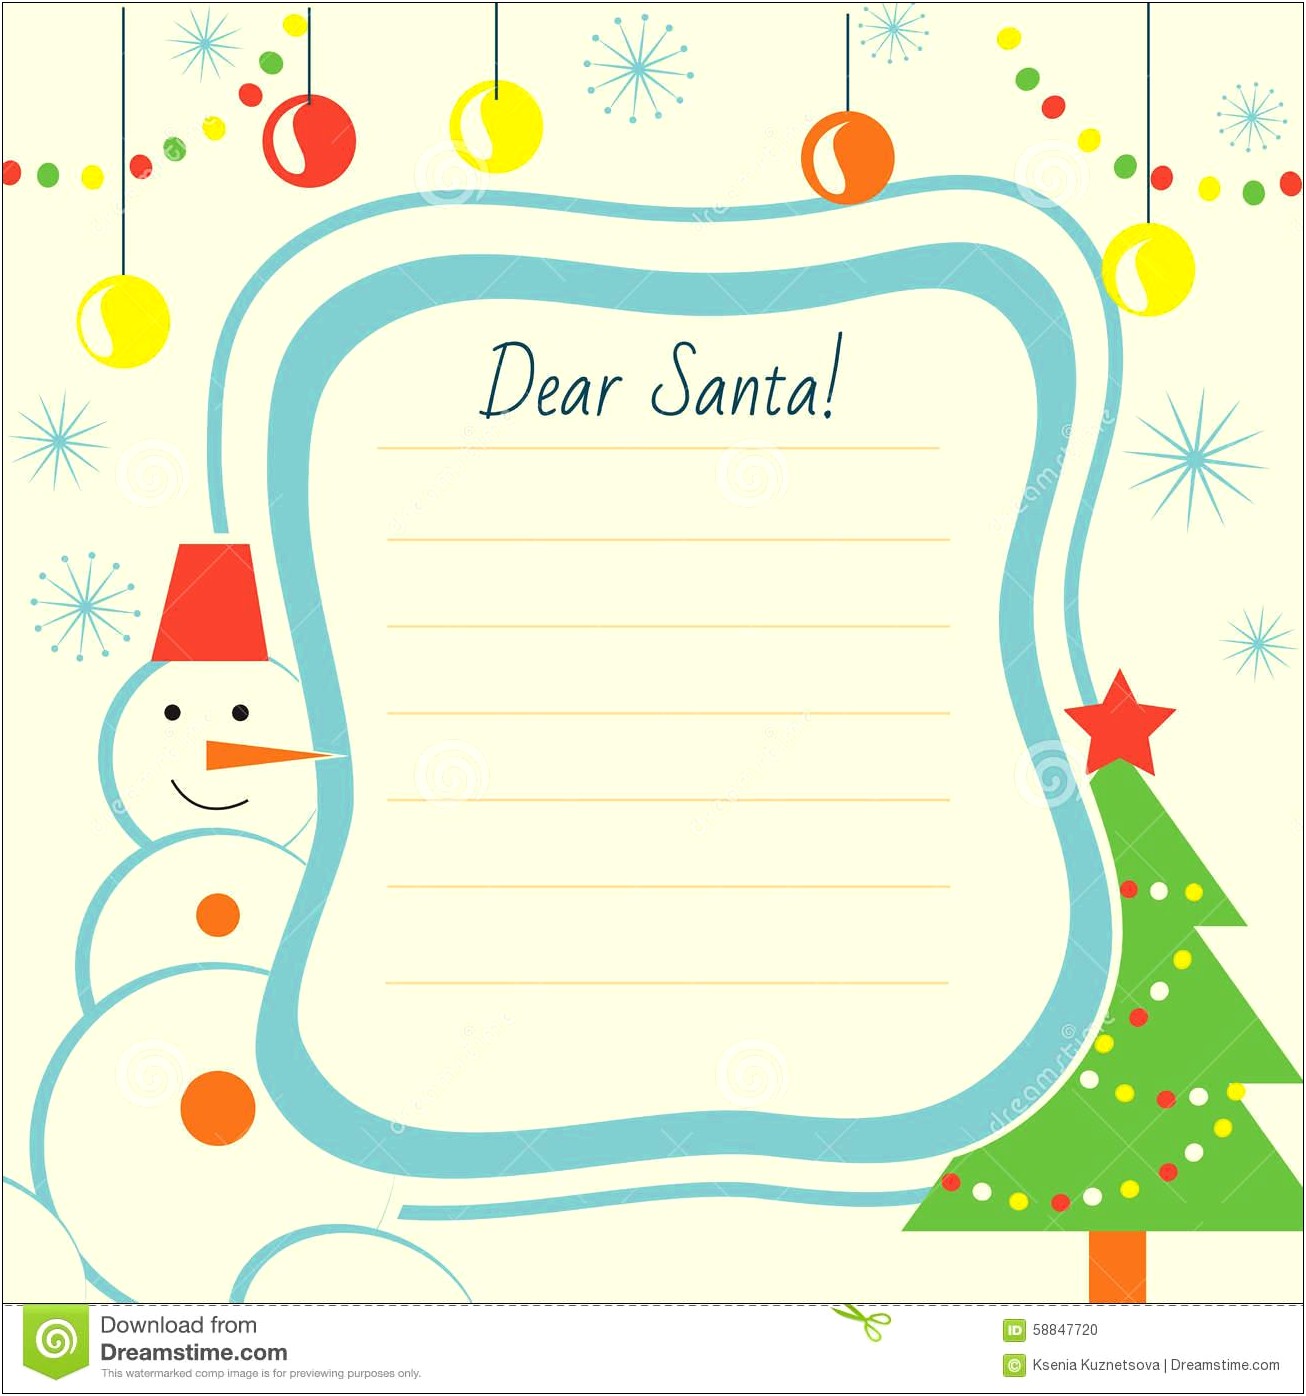 Children's Christmas Card Templates Free